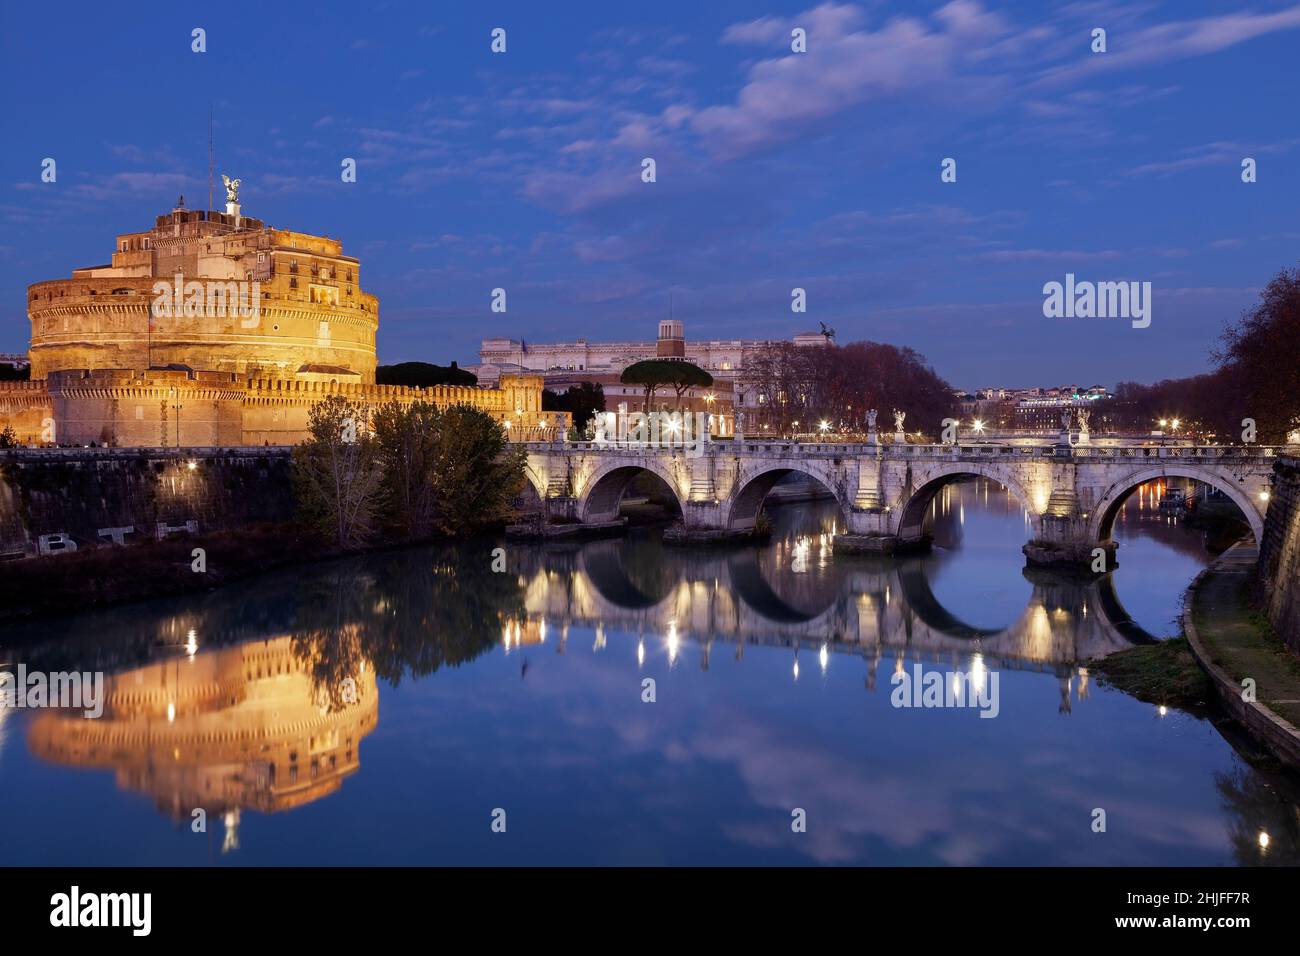 Night falling over Tiber river, Castel Sant'Angelo and Ponte Sant'Angelo of the Vatican City, in Rome, Italy, Europe. Stock Photo